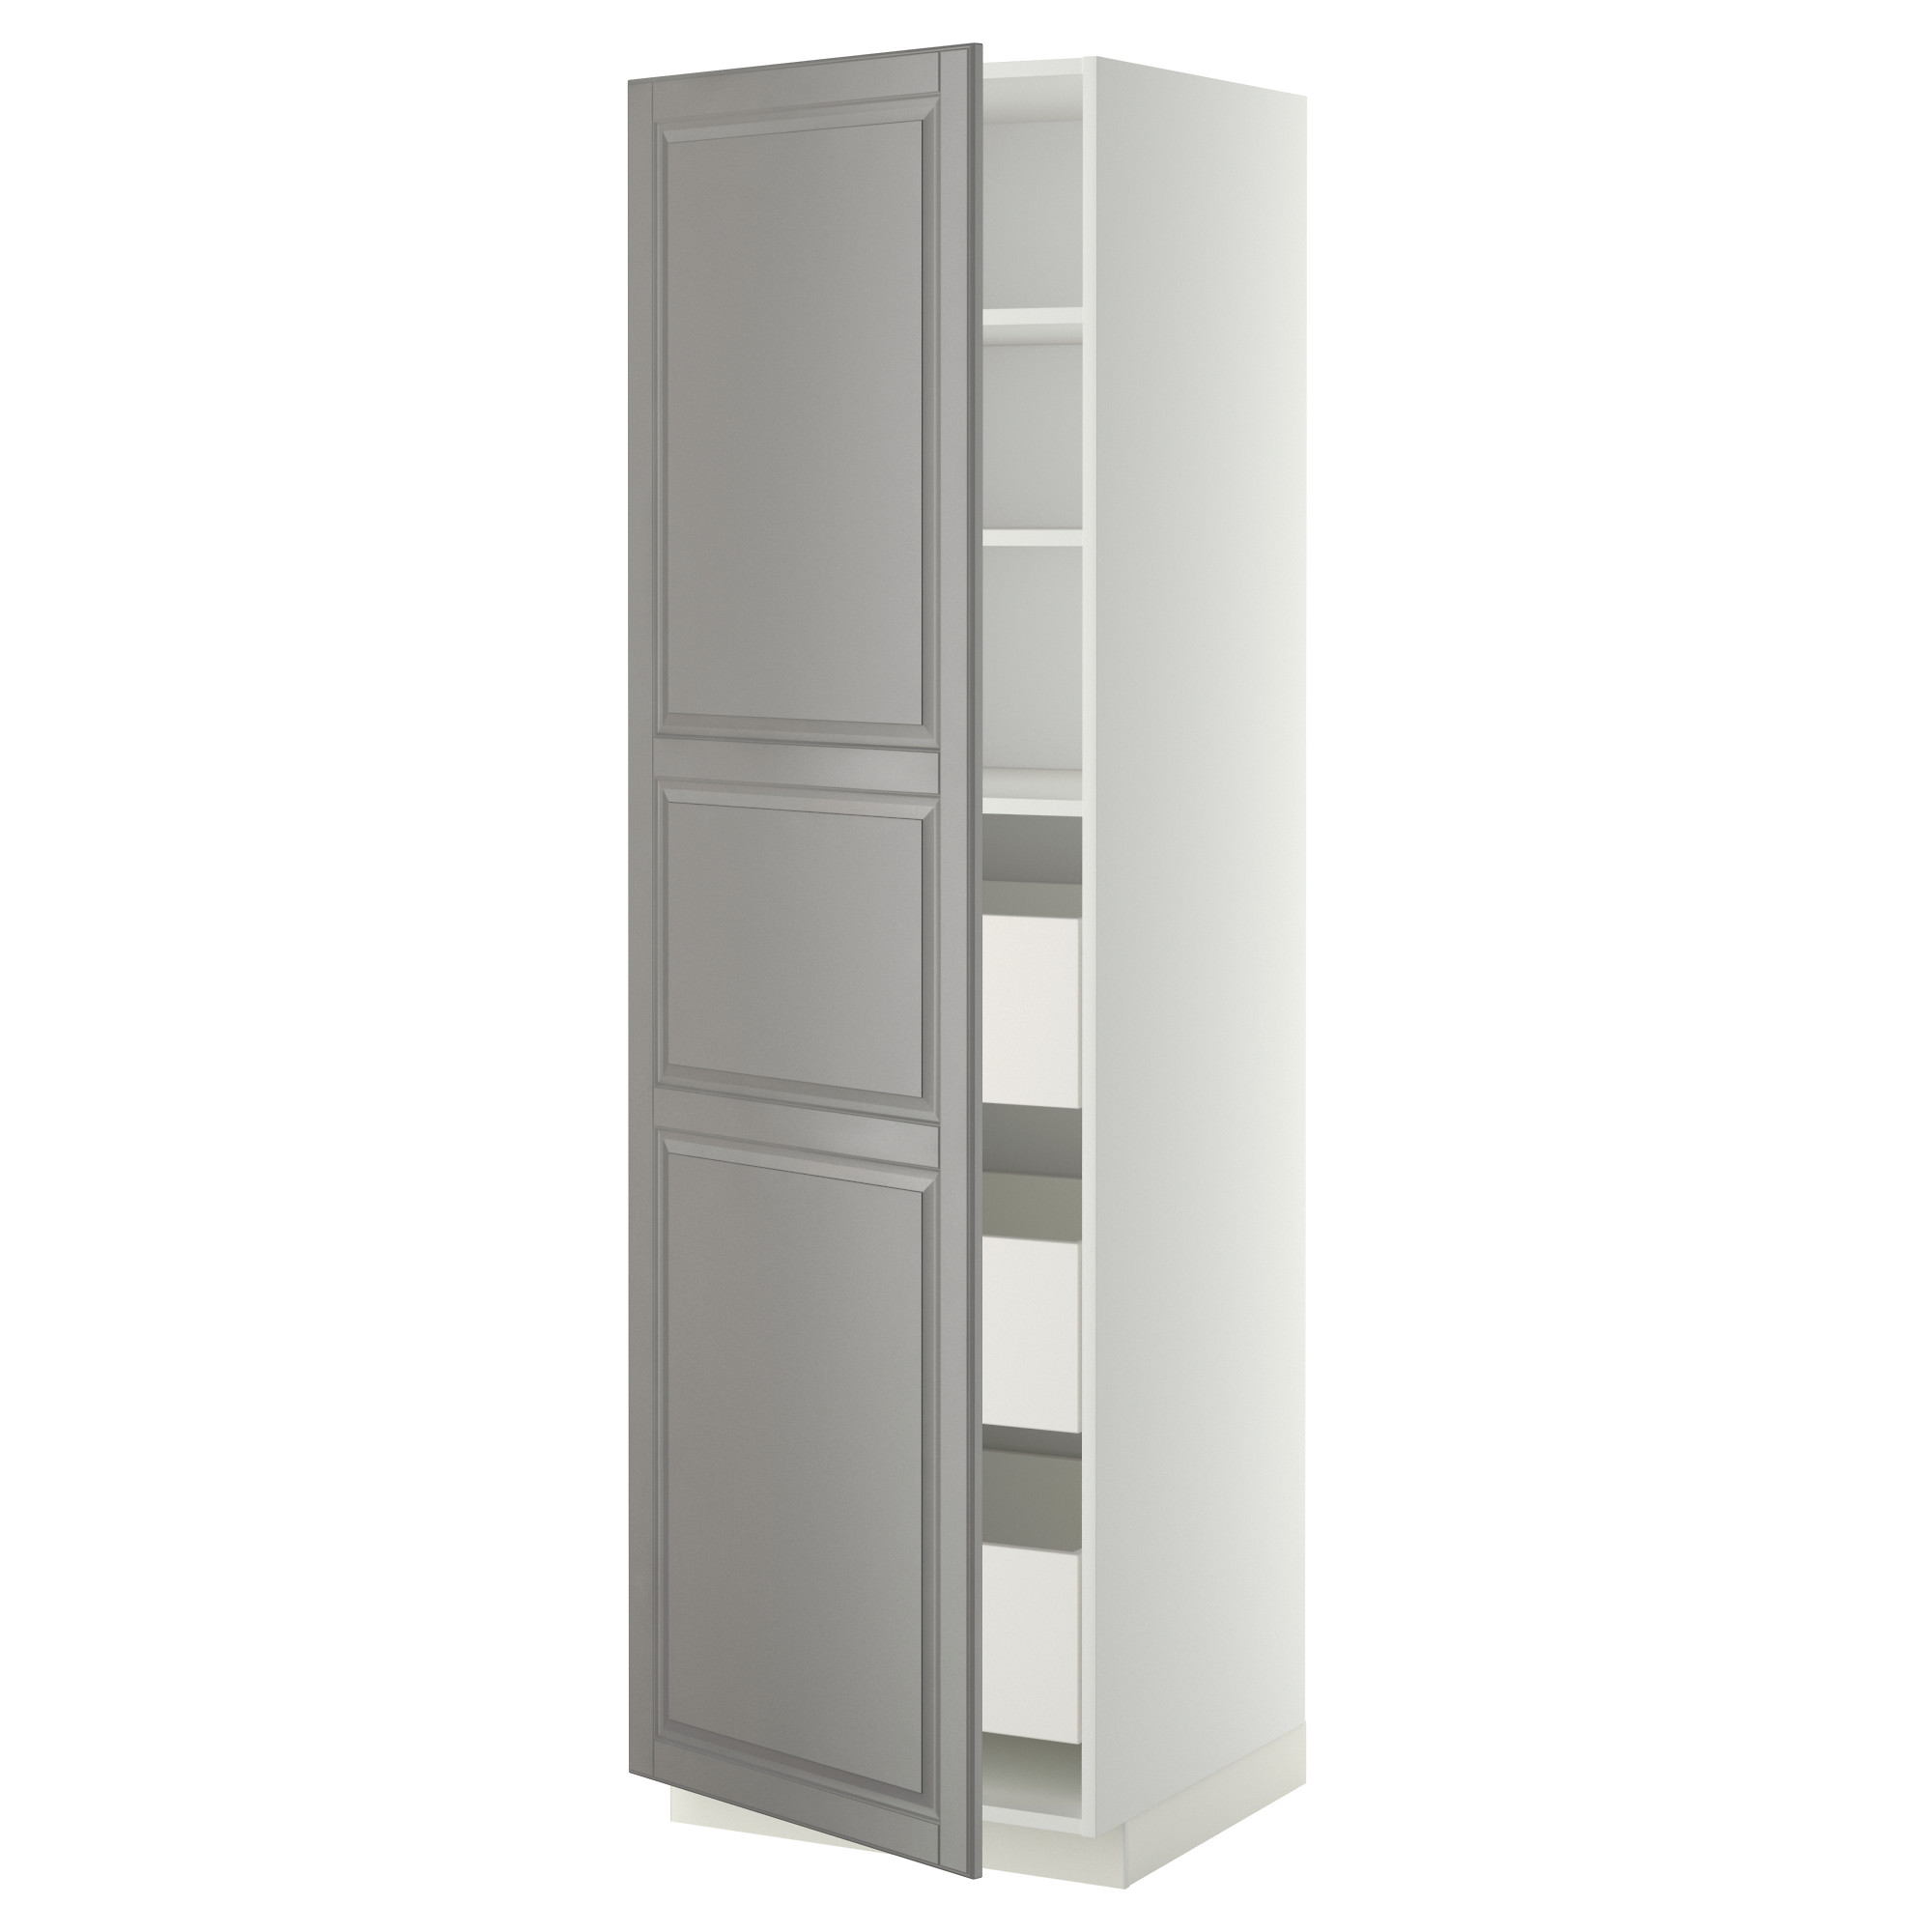 METOD/MAXIMERA high cabinet with drawers